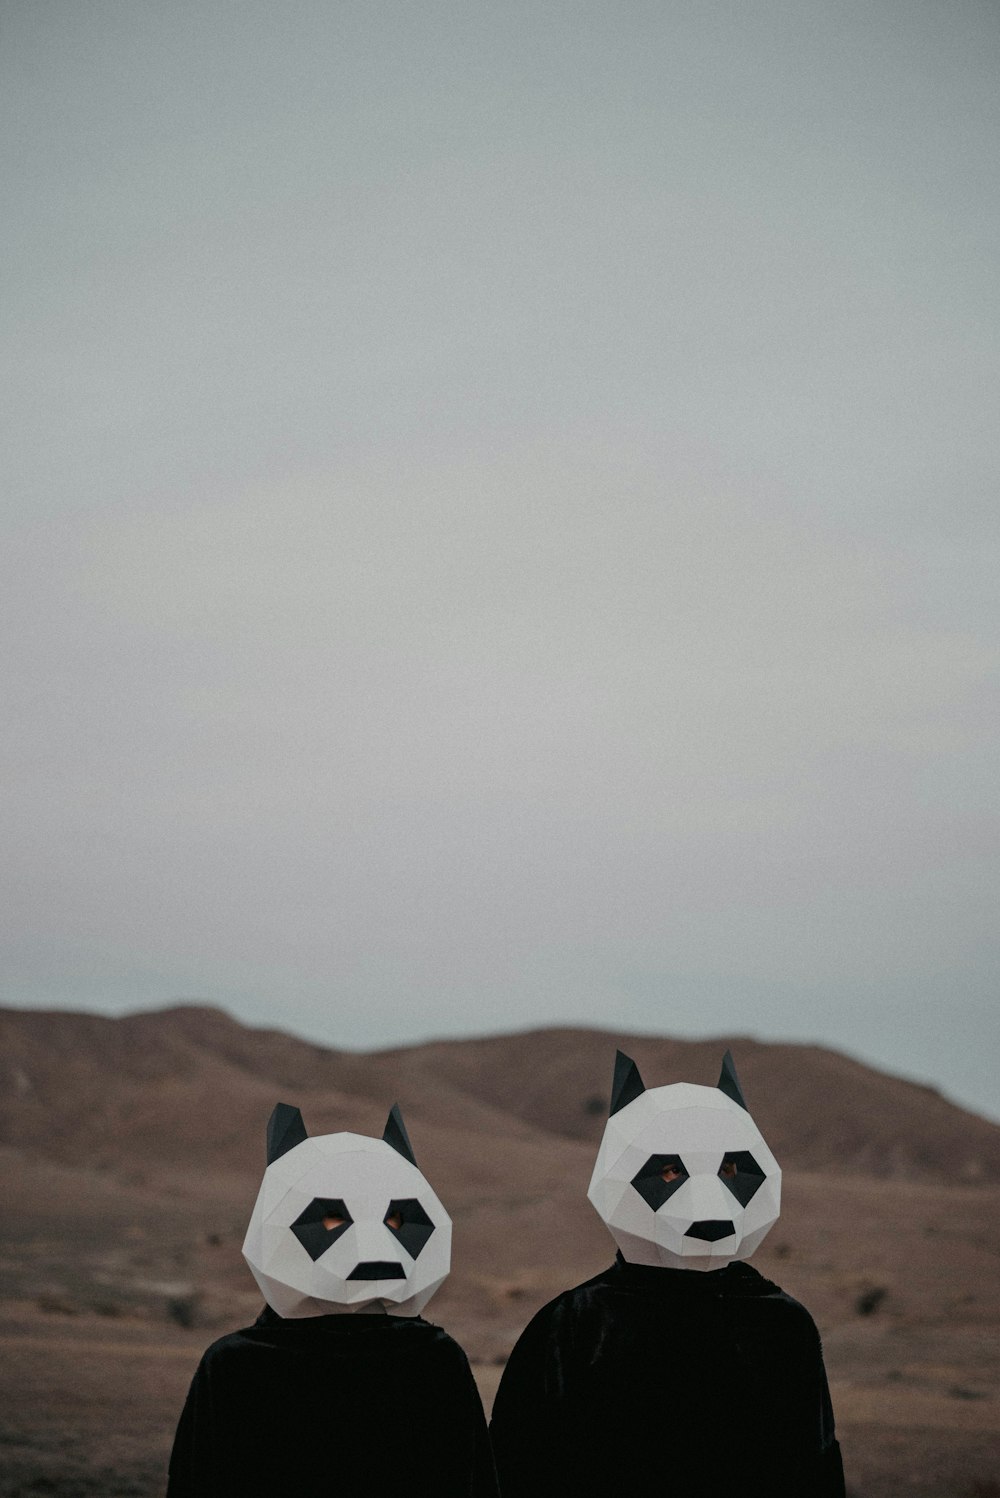 two people wearing panda masks standing in front of a mountain